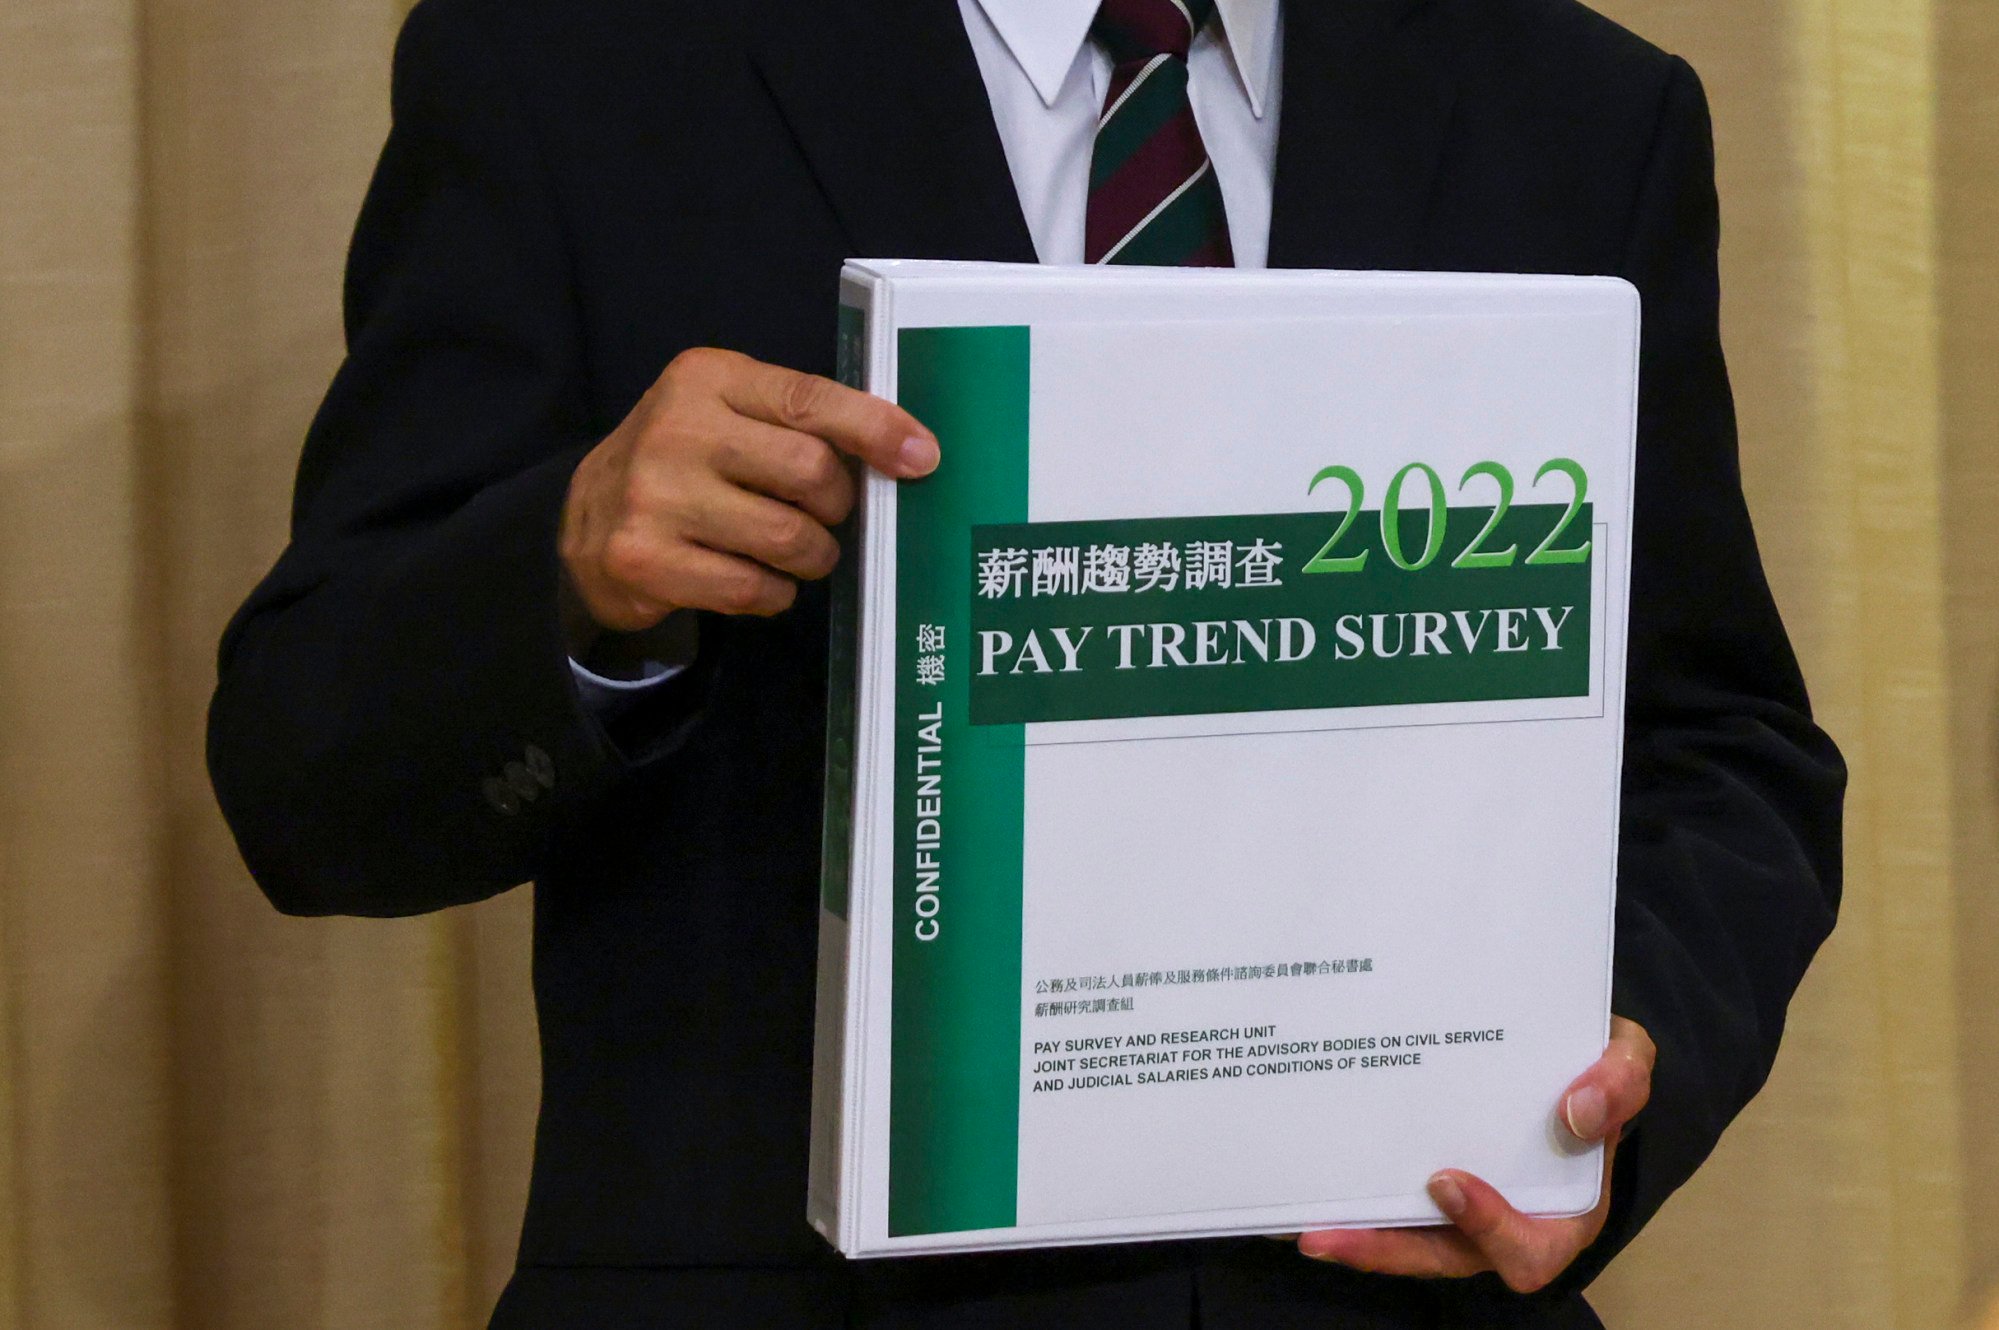 Civil servants’ unions have called for authorities to adopt the salary adjustments recommended by this year’s pay trend survey. Photo: Nora Tam